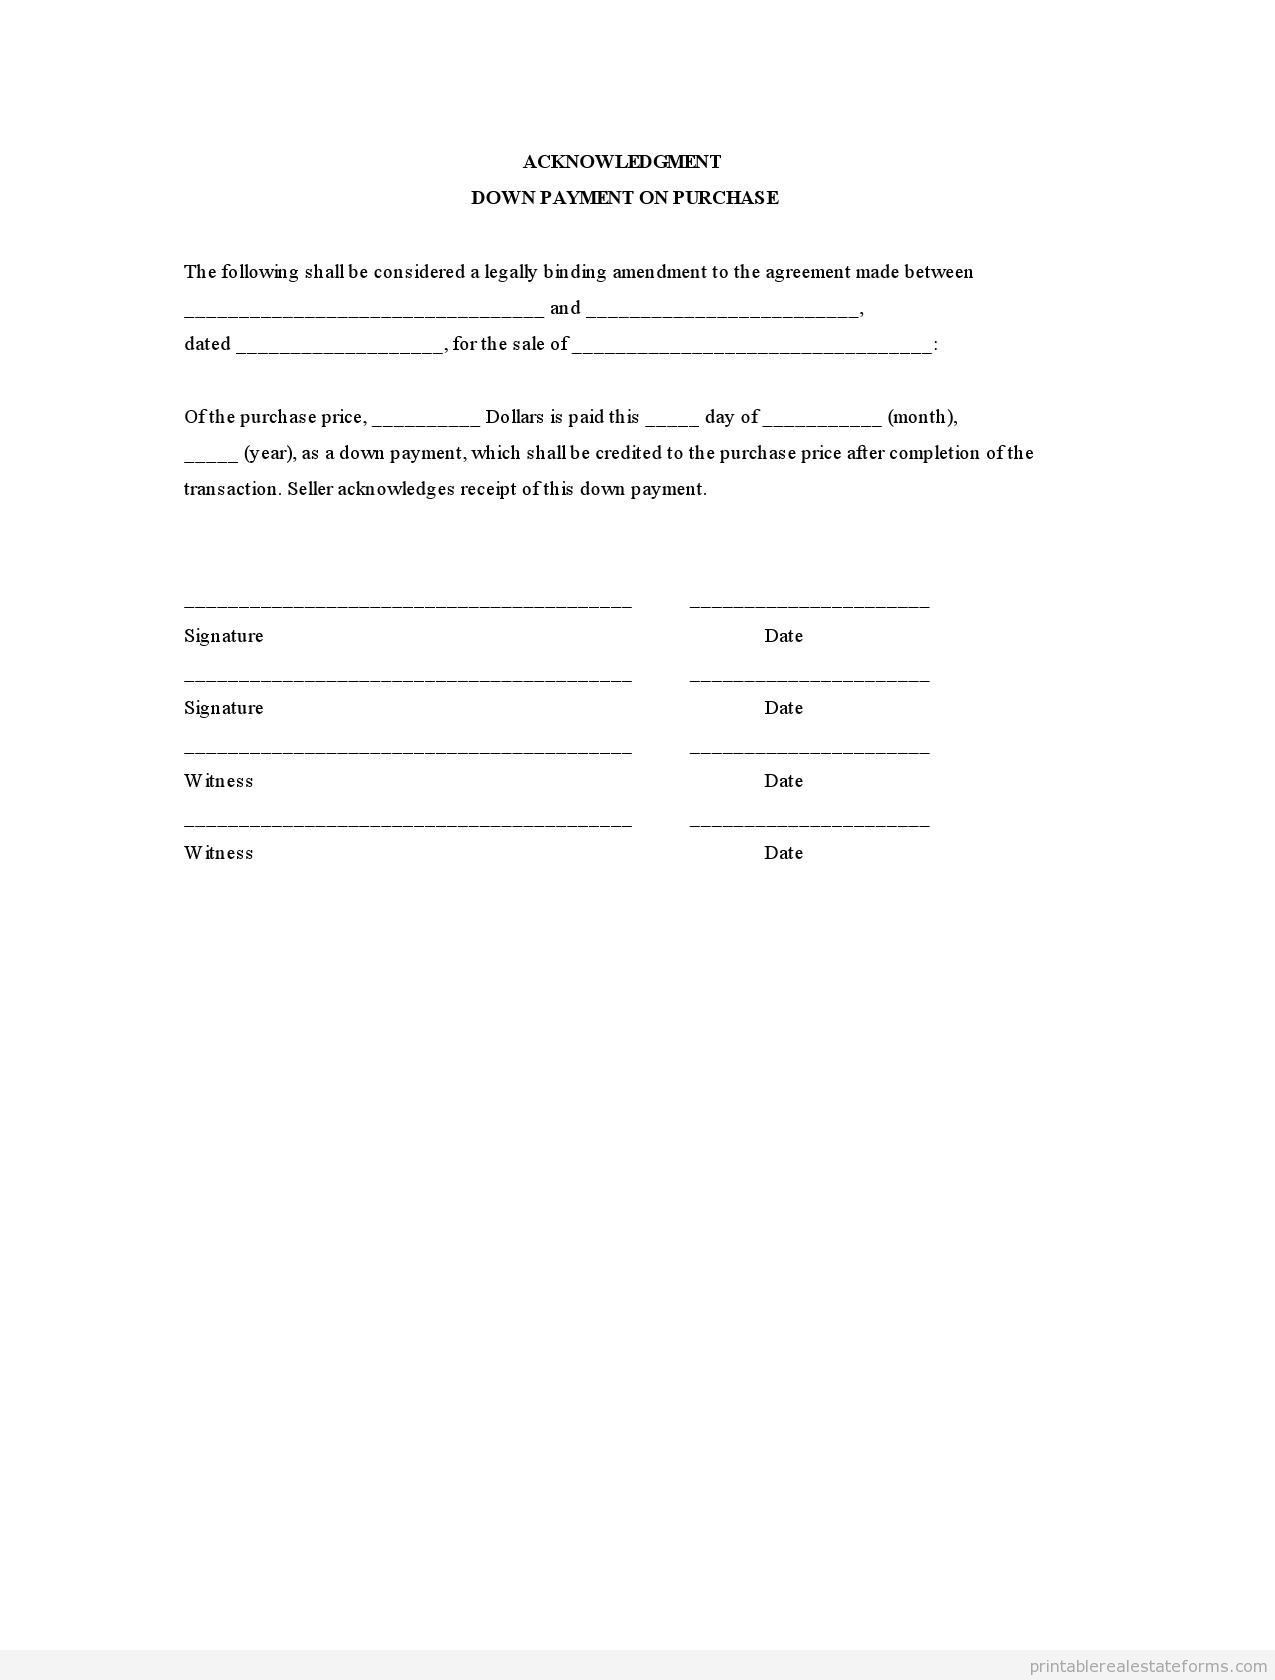 Sample Printable Acknowledgment Down Payment On Purchase Form Document Contract Template